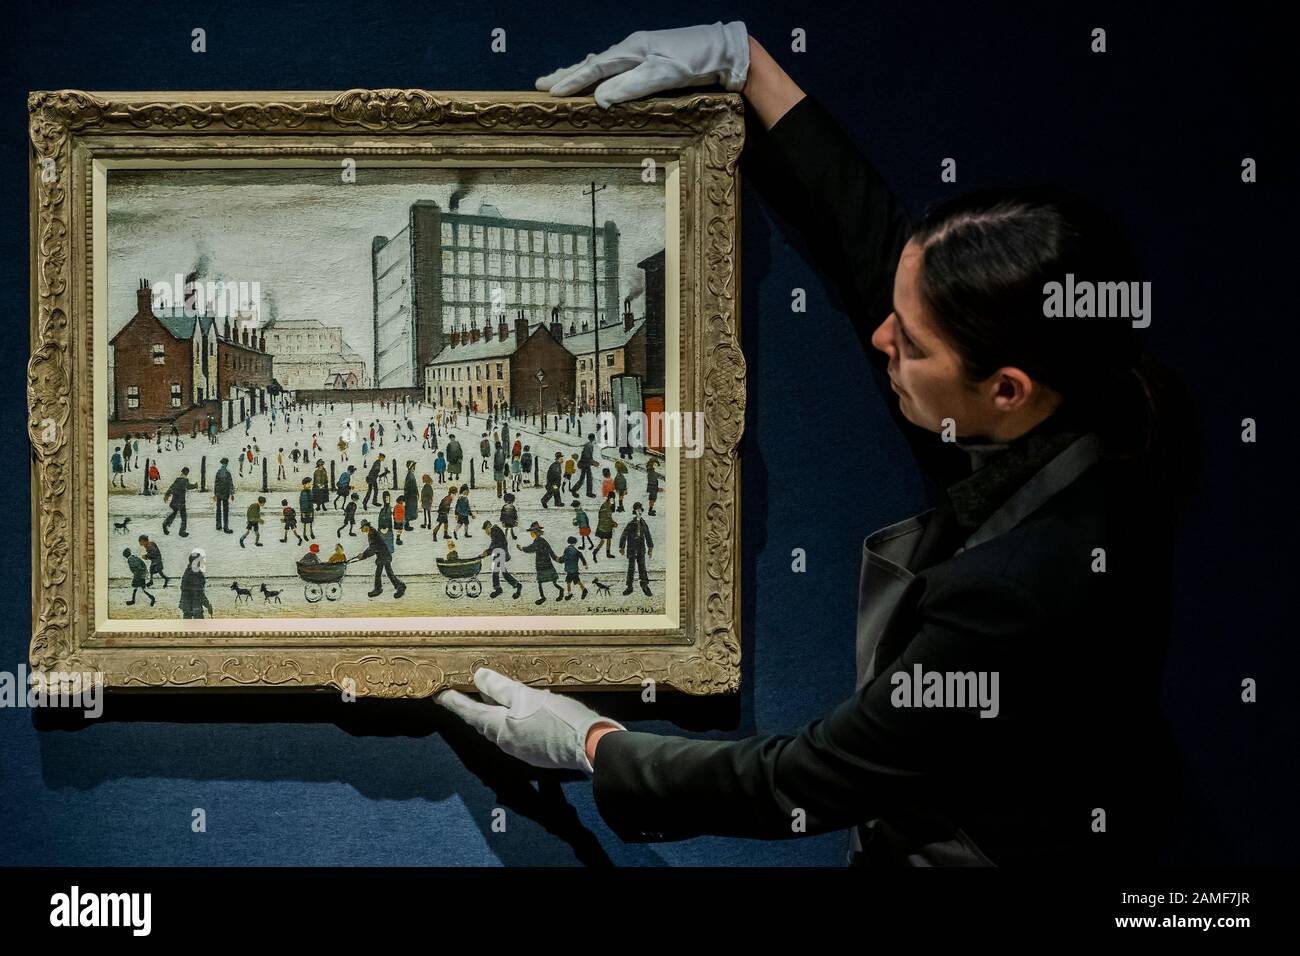 London, UK. 13th Jan 2020. LAURENCE STEPHEN LOWRY, R.A. (1887-1976) The Mill, Pendlebury Estimate GBP 700,000 - GBP 1,000,000 (USD 920,499 - USD 1,314,999) Painted in 1943. - Christies previews the Modern British Art Evening Sale on 21 January 2020 which launches the 20th Century auction series in London and will be followed by the Modern British Art Day Sale and The Delighted Eye: Works from the Collection of Allen and Beryl Freer on 22 and 23 January respectively. Credit: Guy Bell/Alamy Live News Stock Photo